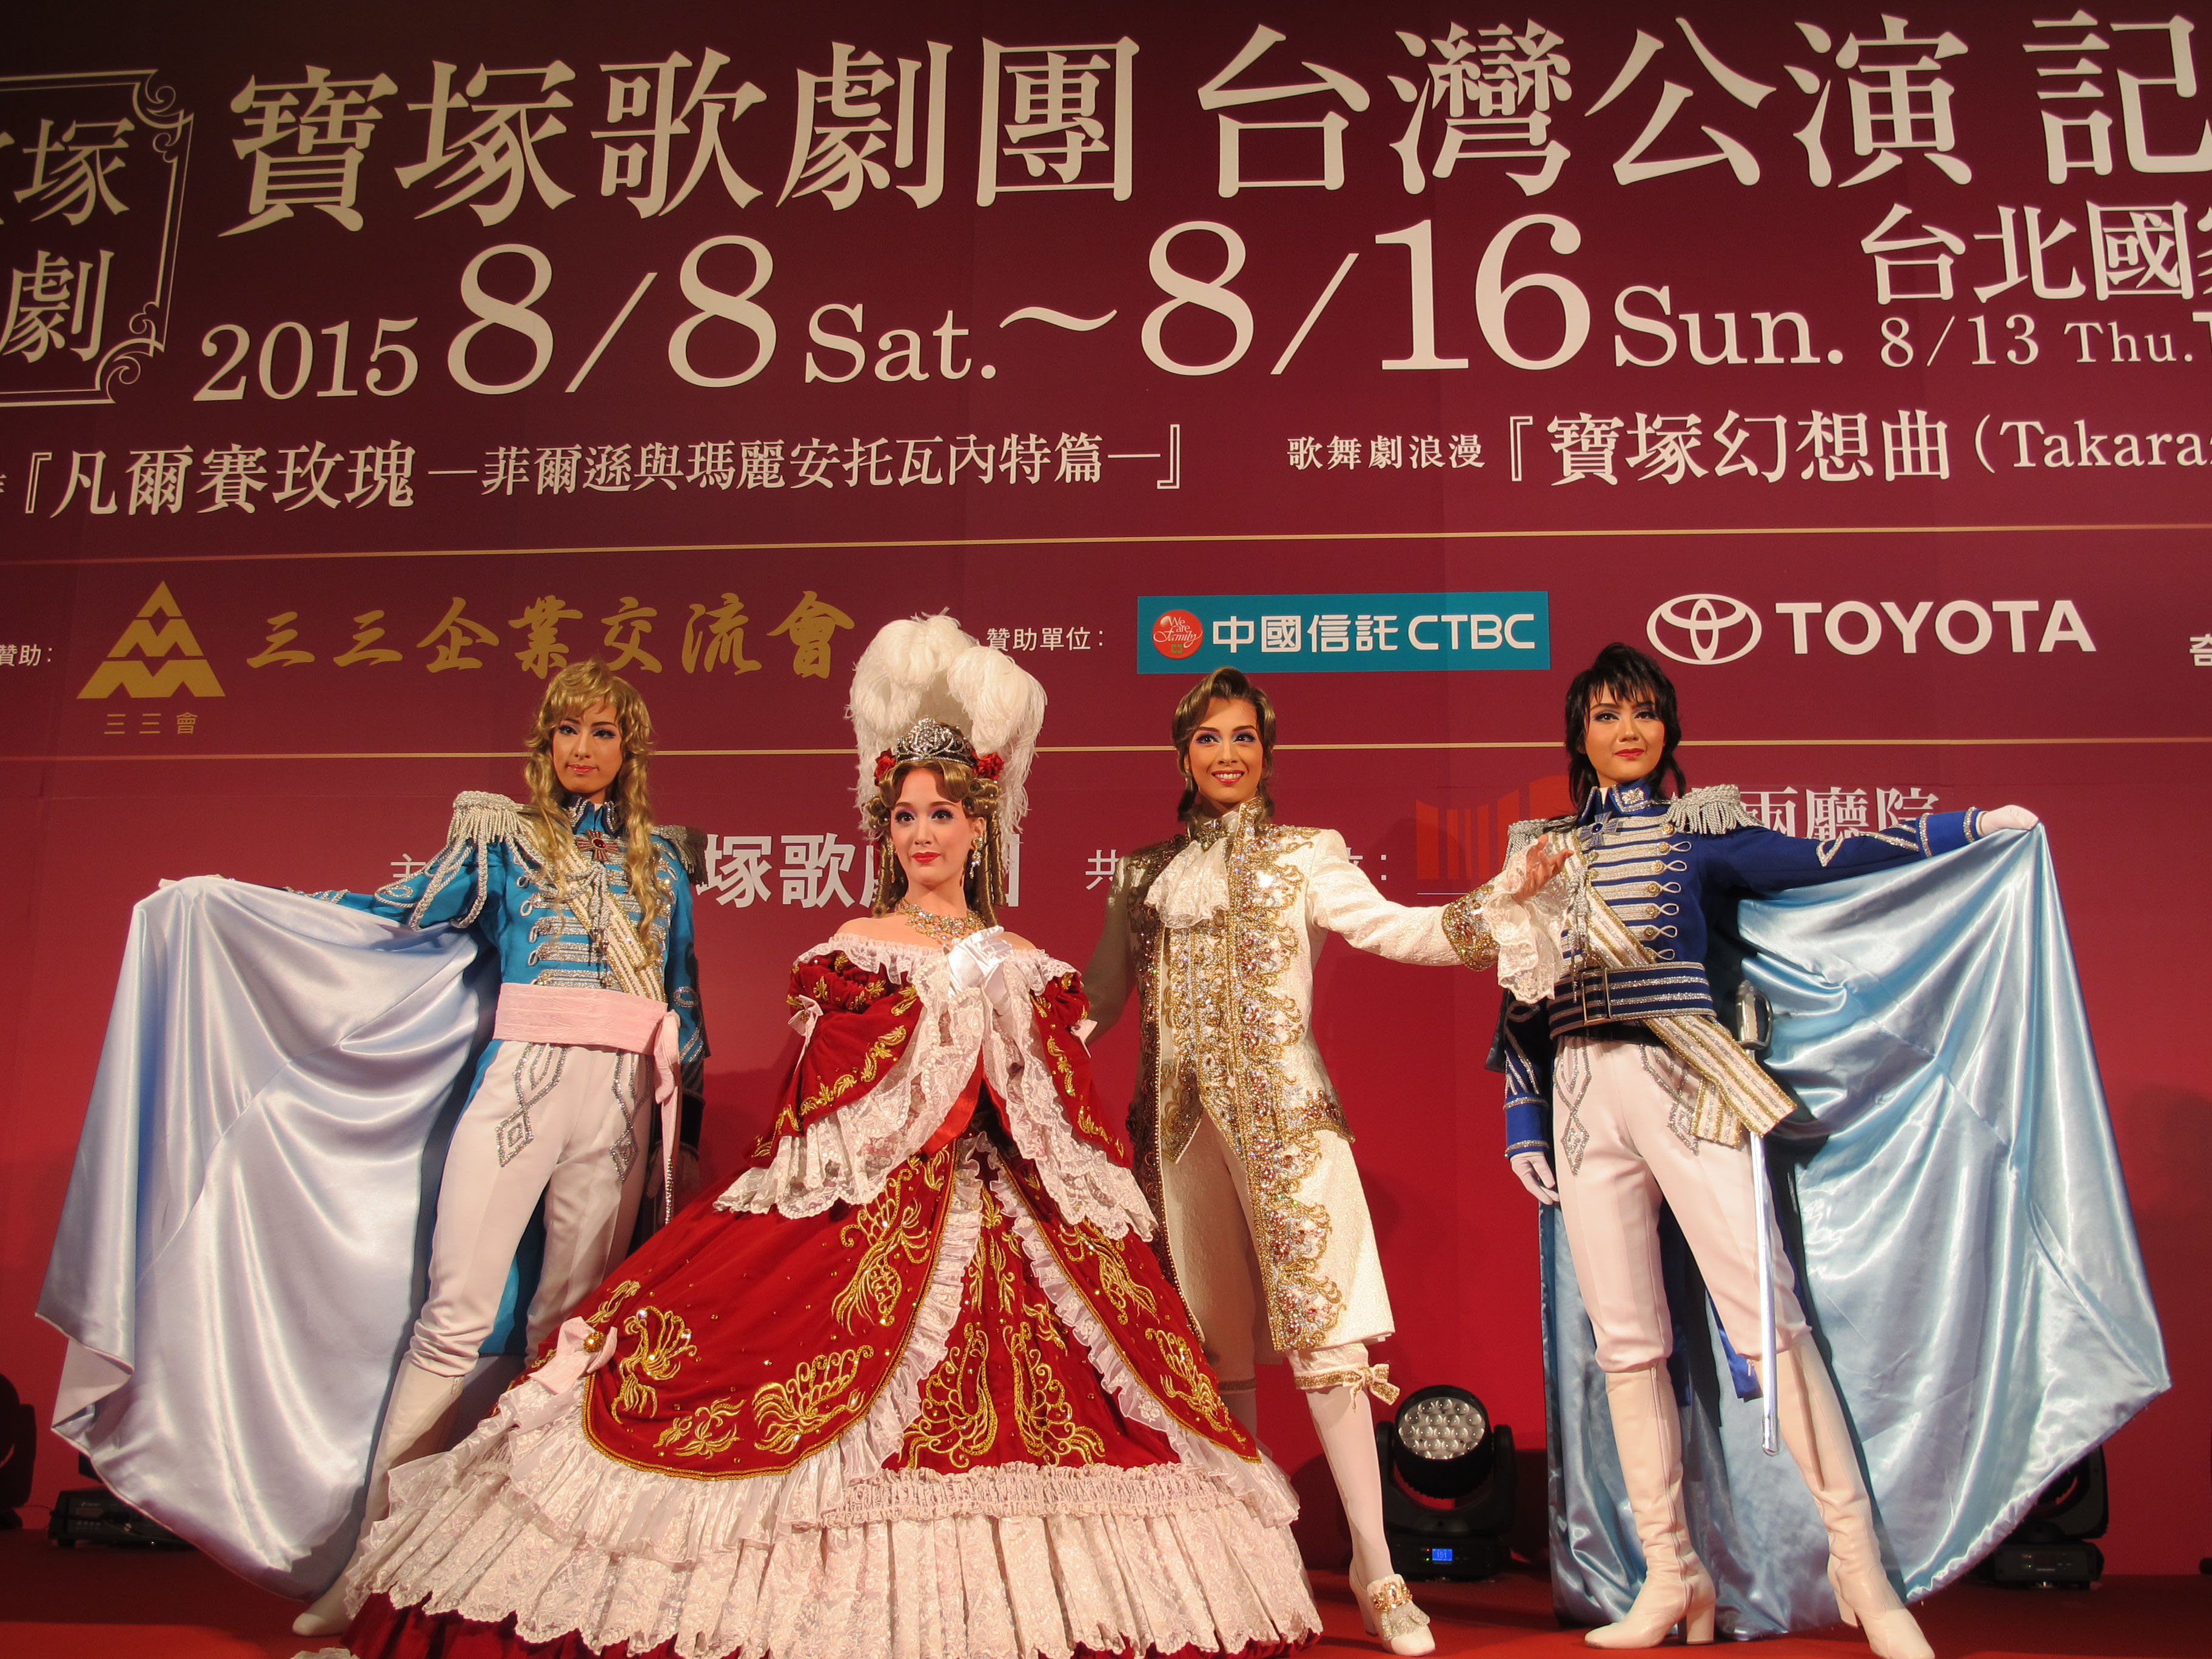 Takarazuka Revue to make second Taiwan tour in August - The Japan